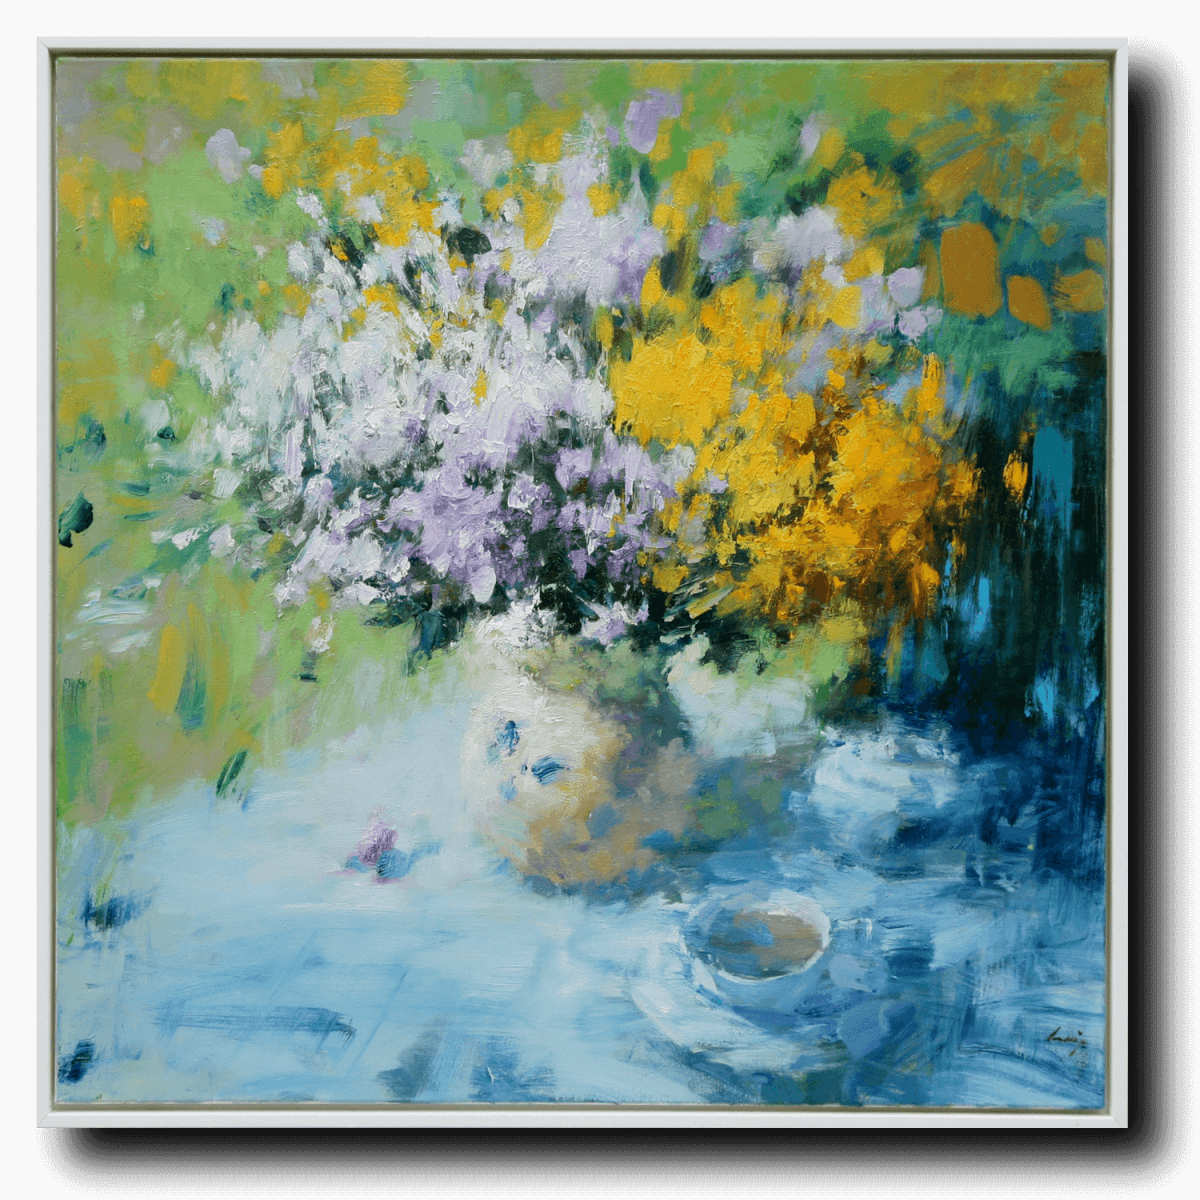 Summer Flowers by Ning Lee at LePrince Galleries